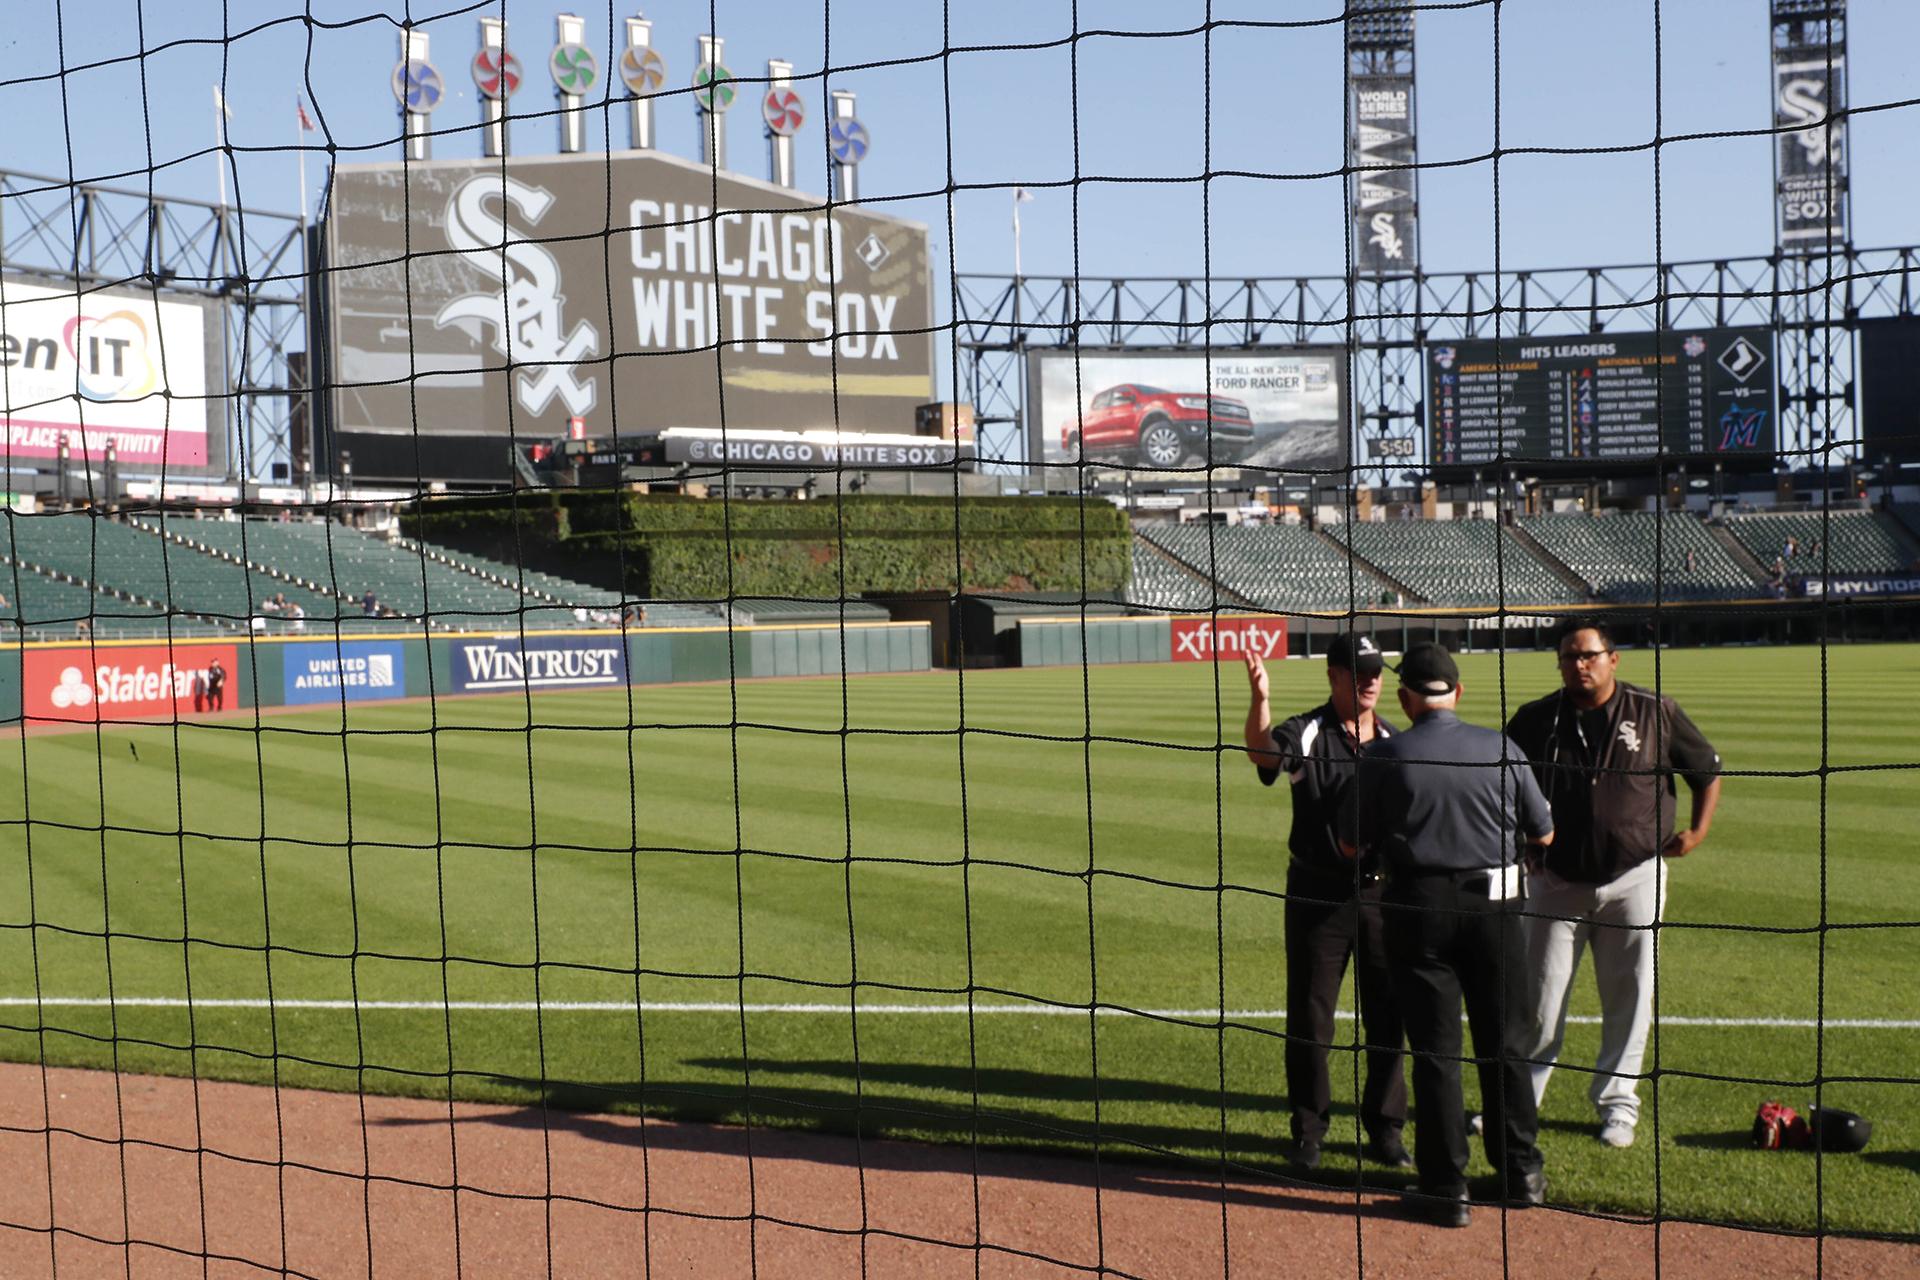 White Sox Host 1st MLB Game with Foul Pole-to-Pole Netting, Chicago News